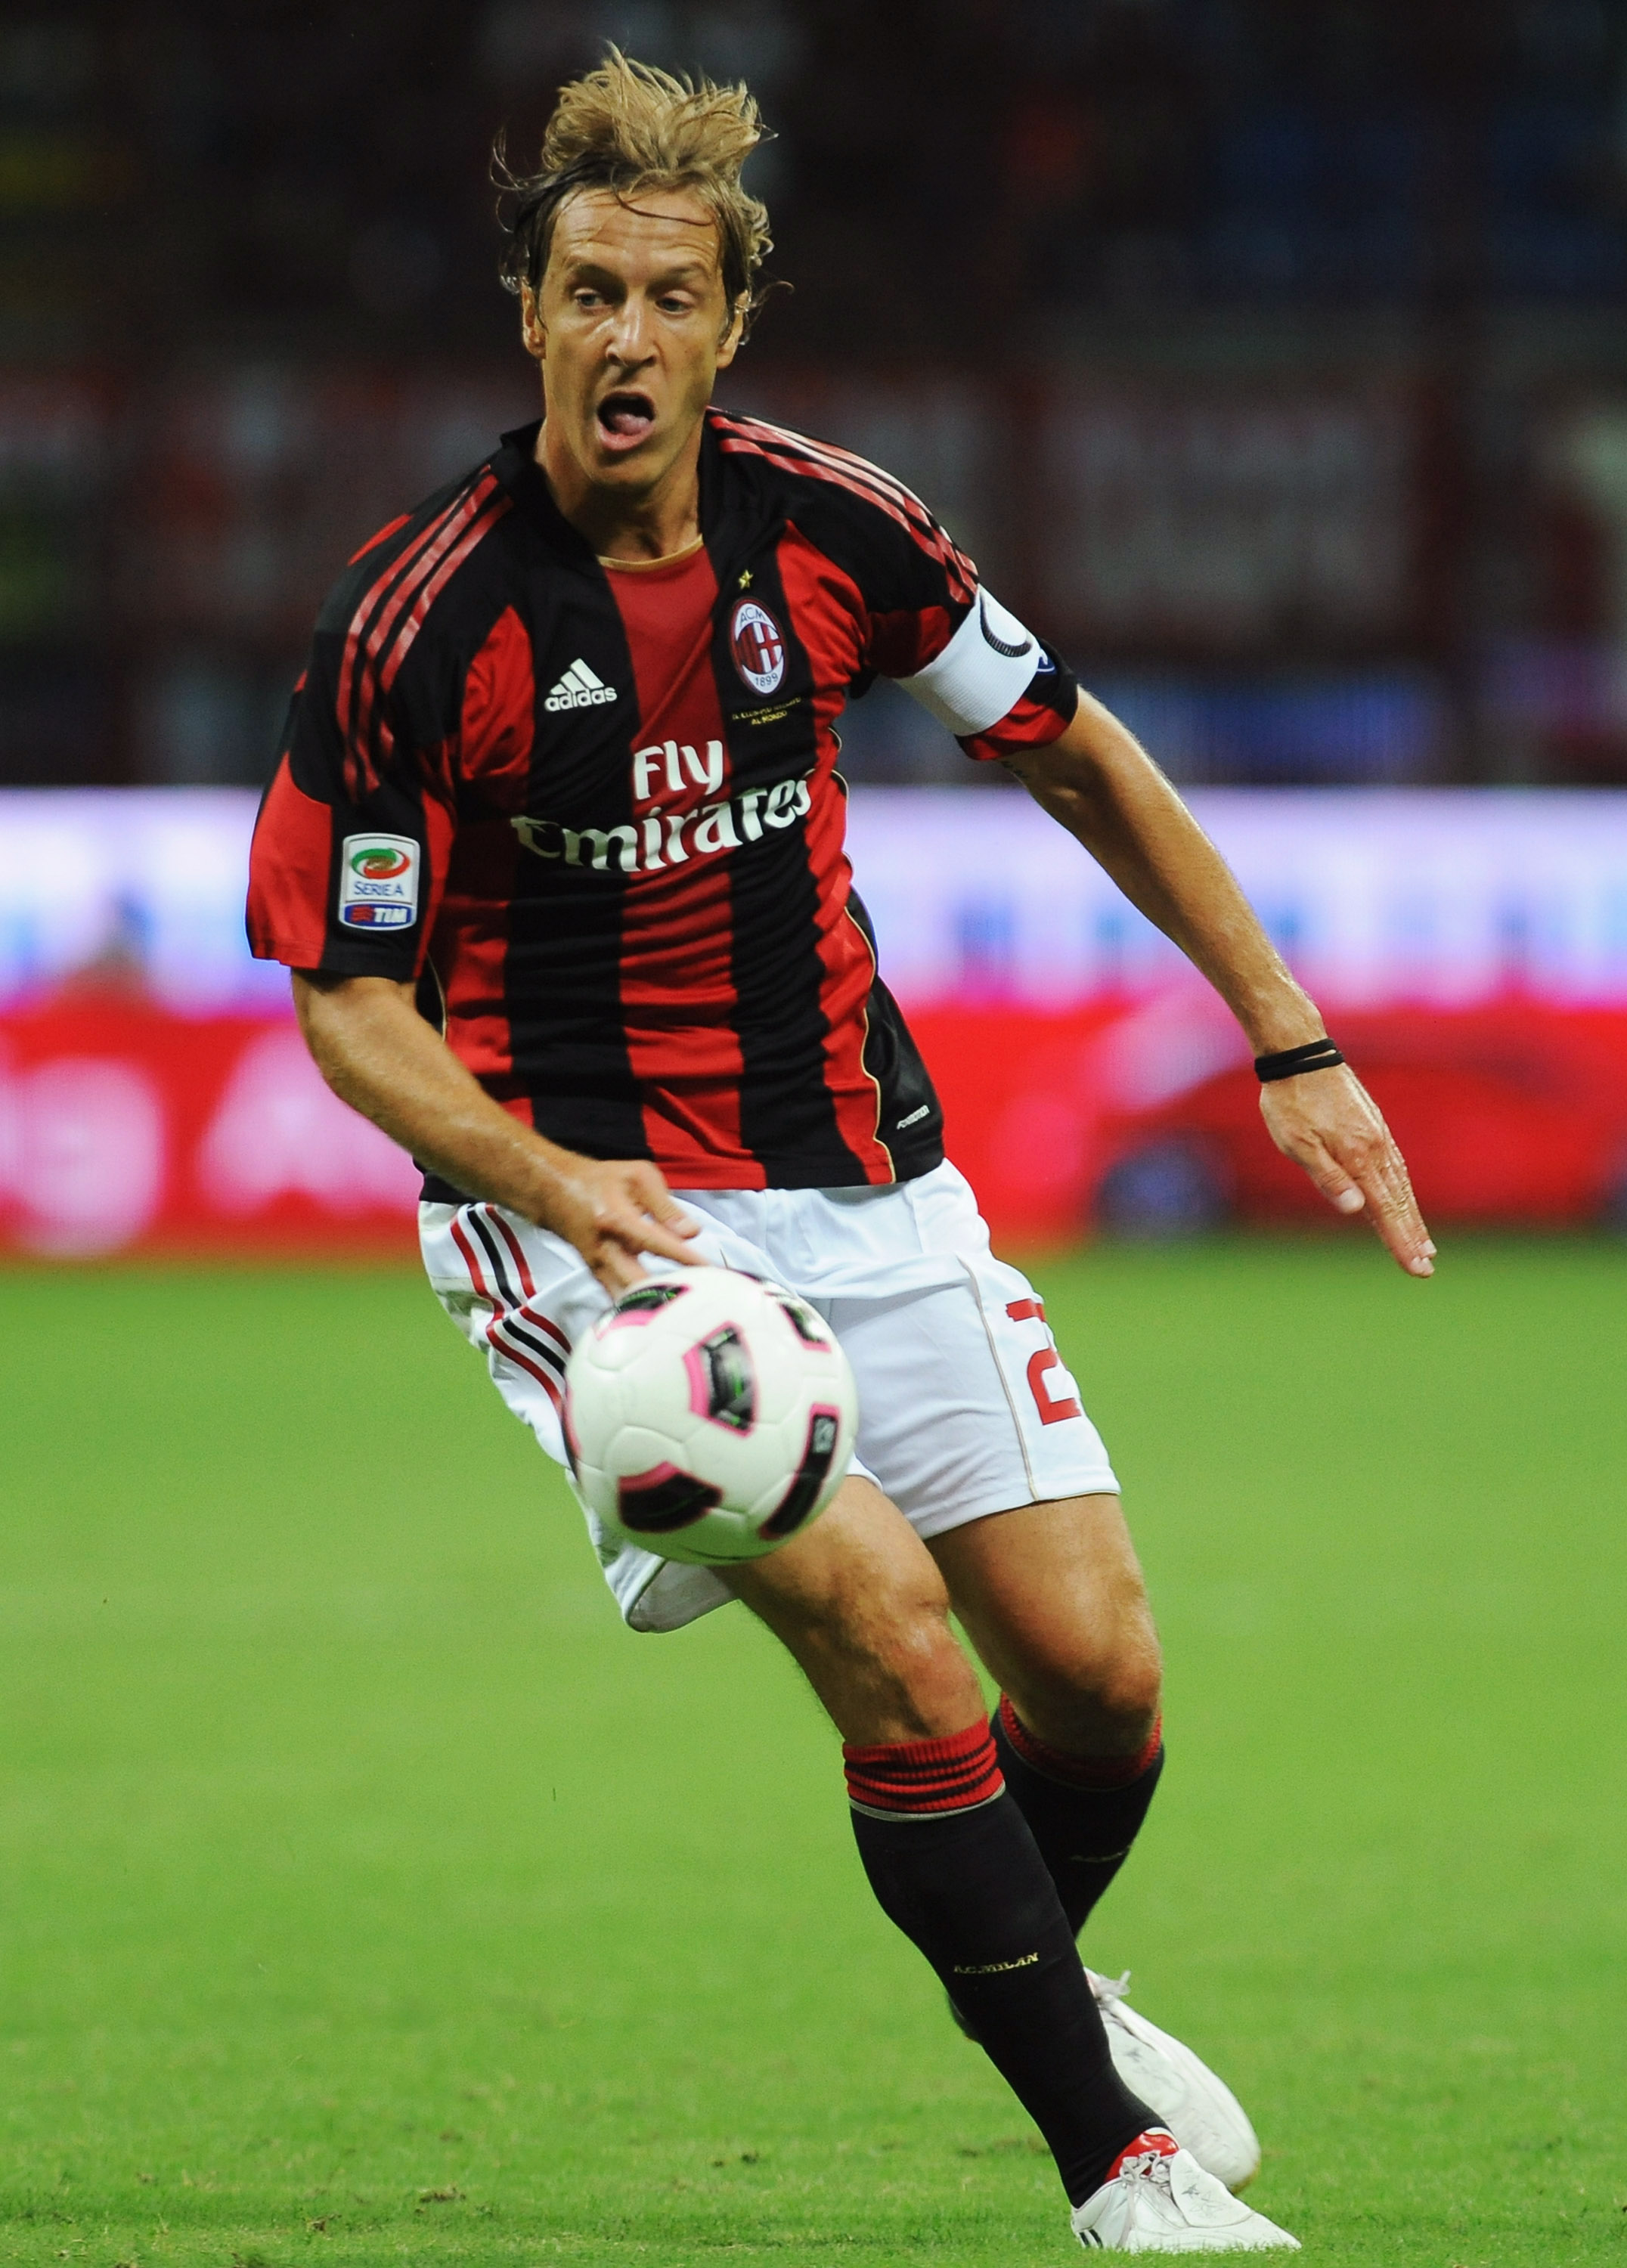 Replacing Milan's greatest captain ever is no easy task, but Ambrosini stepped into his new role with class and maturity and  proved he deserved the armband.